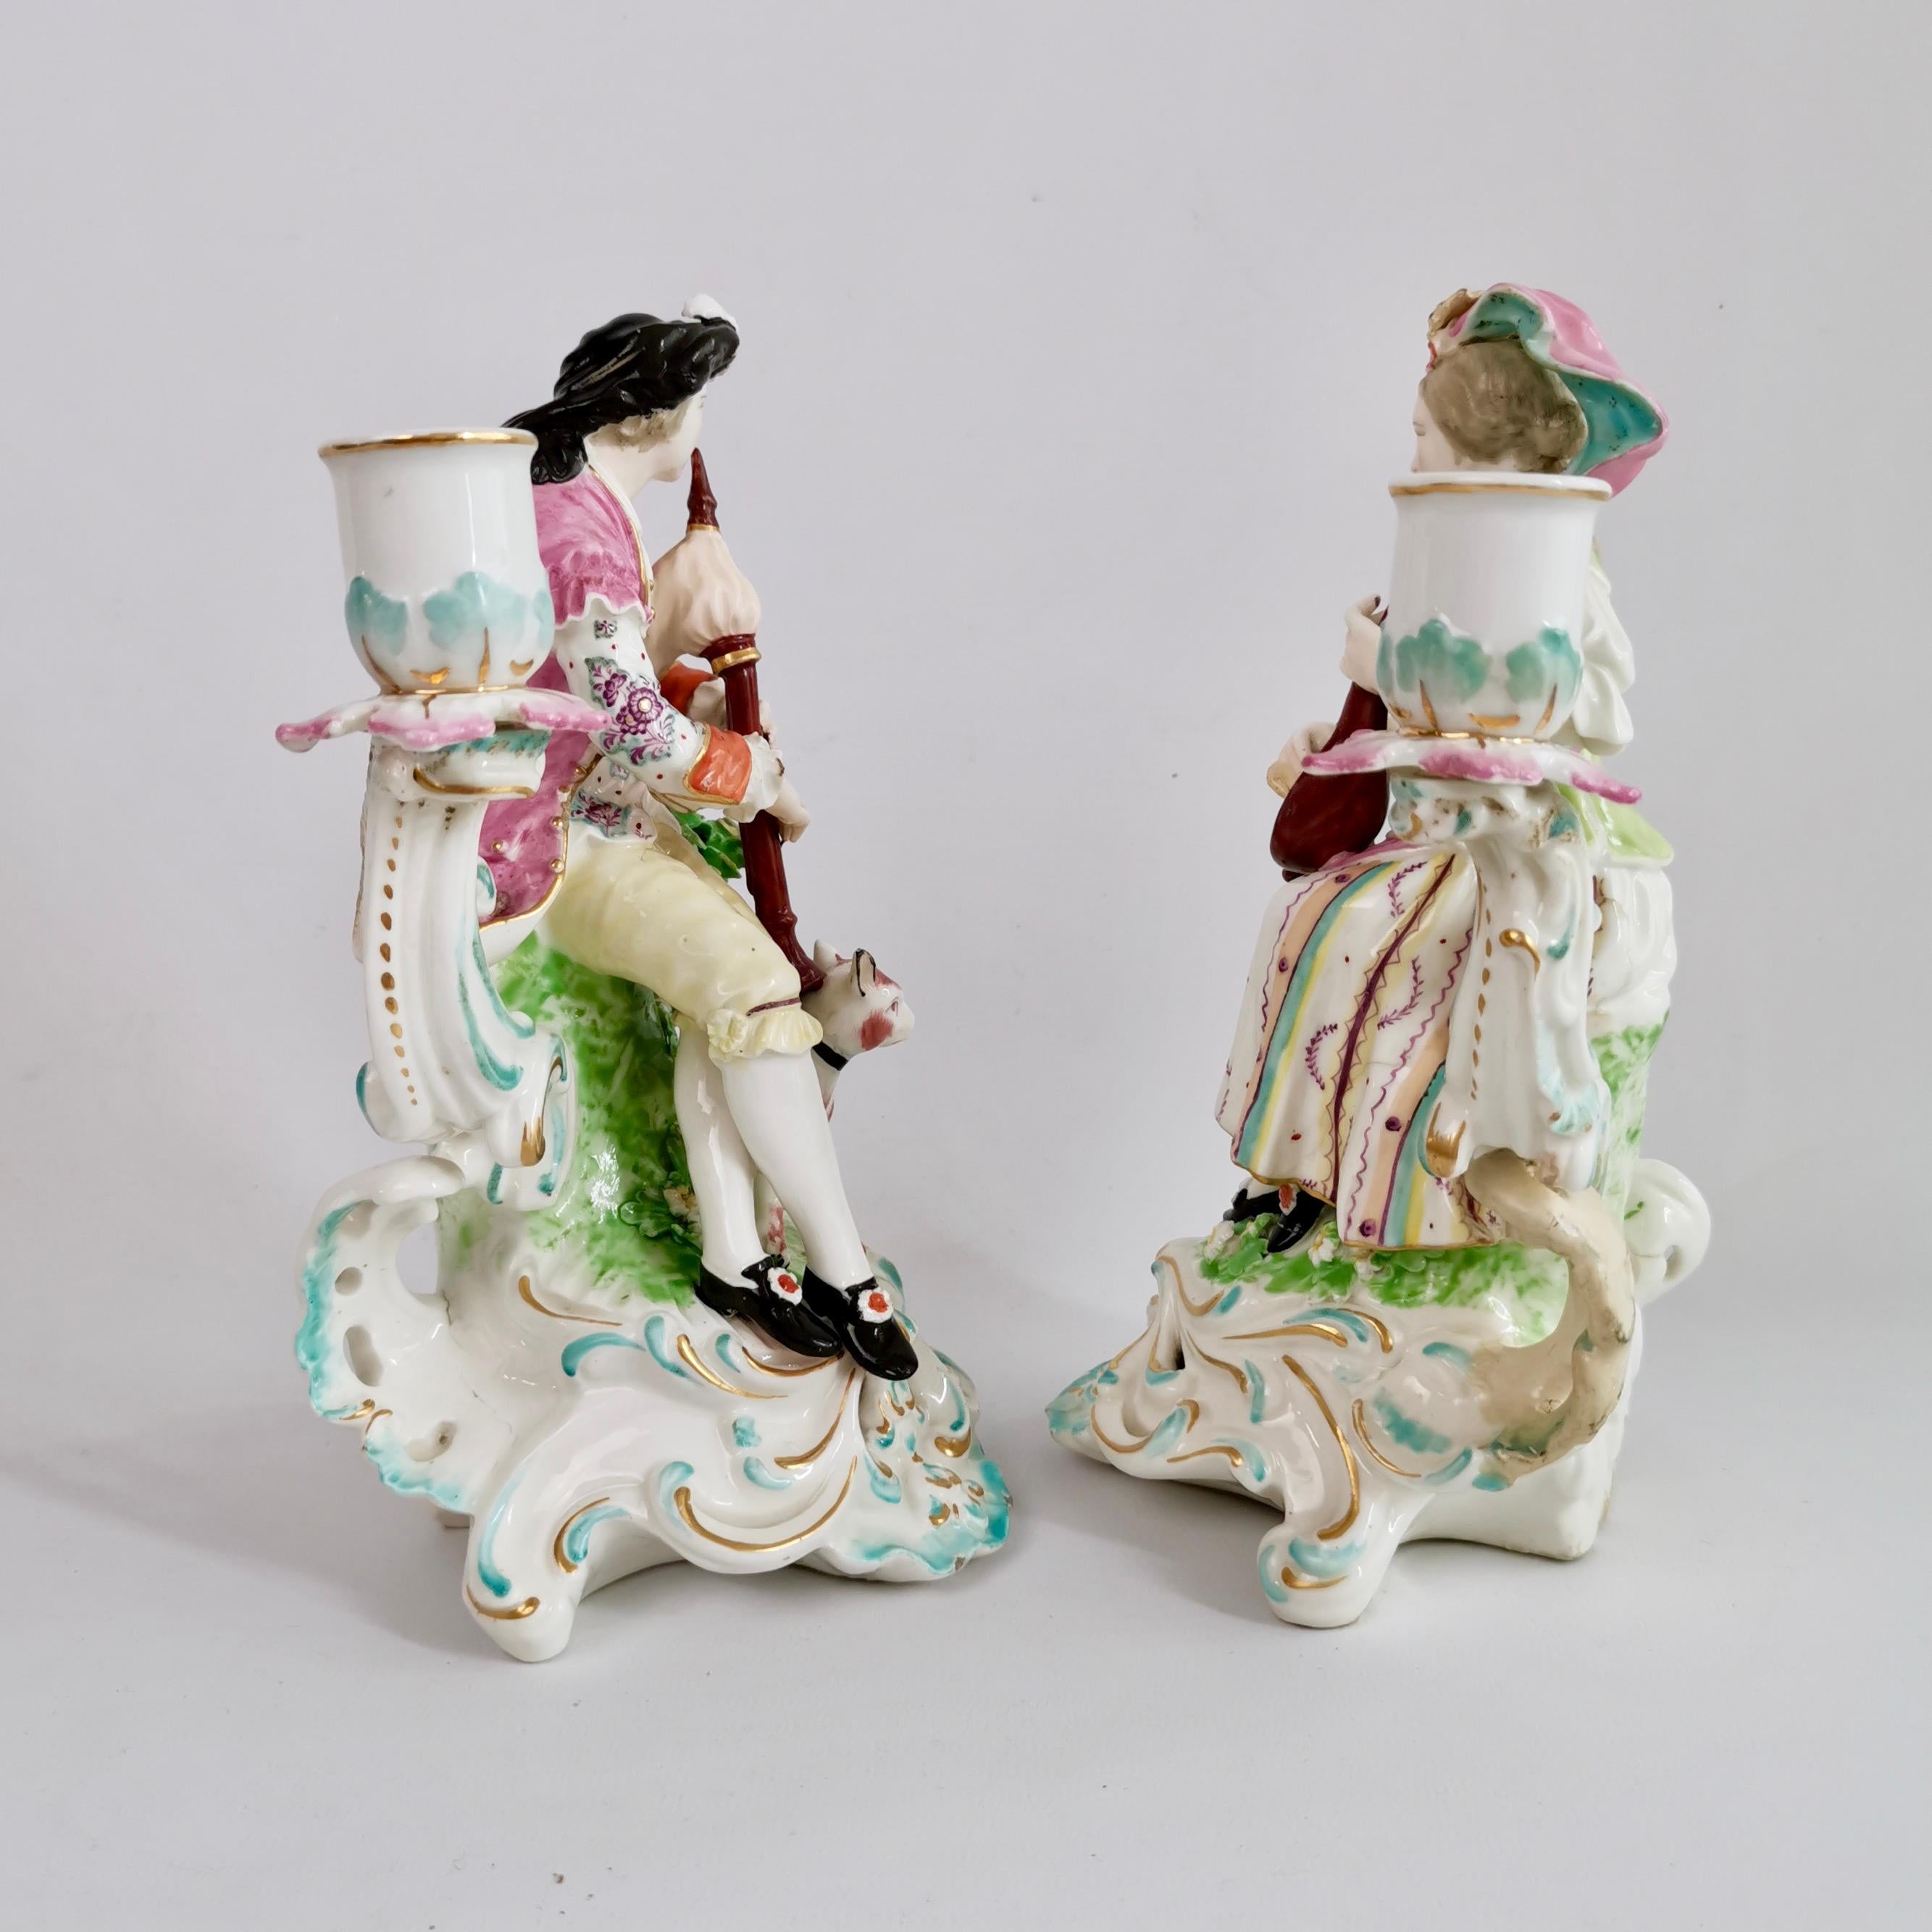 This is a beautiful pair of Derby porcelain candlestick figures of a bagpiper and a lady with lute, made between 1759 and 1769, which was the Rococo era. The pair is one of Derby's famous figure pairs and this particular pair is very beautifully